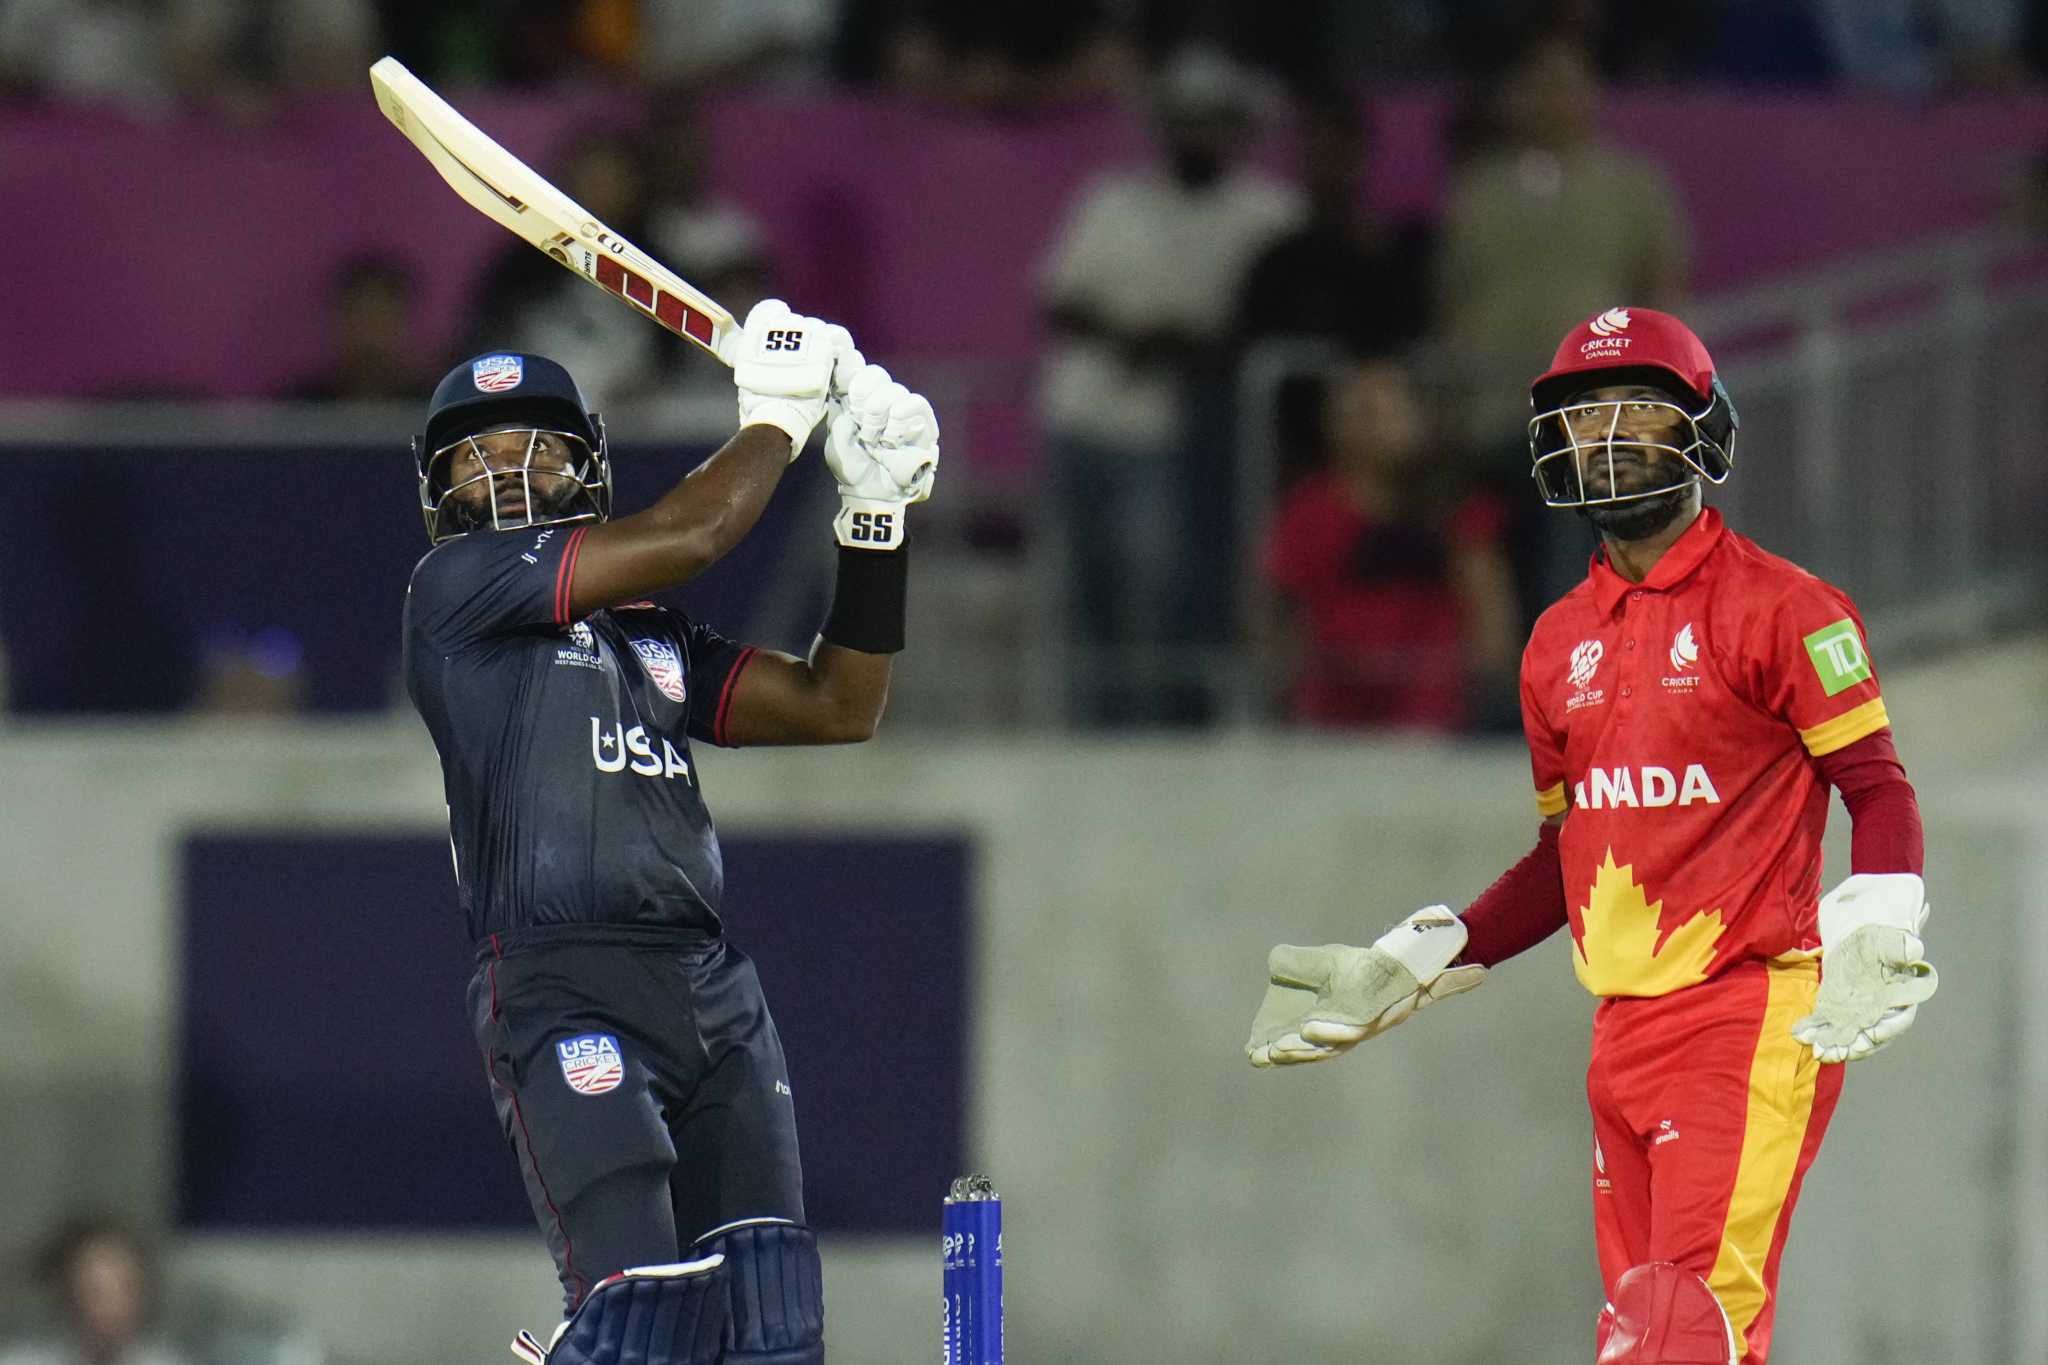 Aaron Jones hits 10 sixes as US beats Canada by 7 wickets to open T20 World Cup